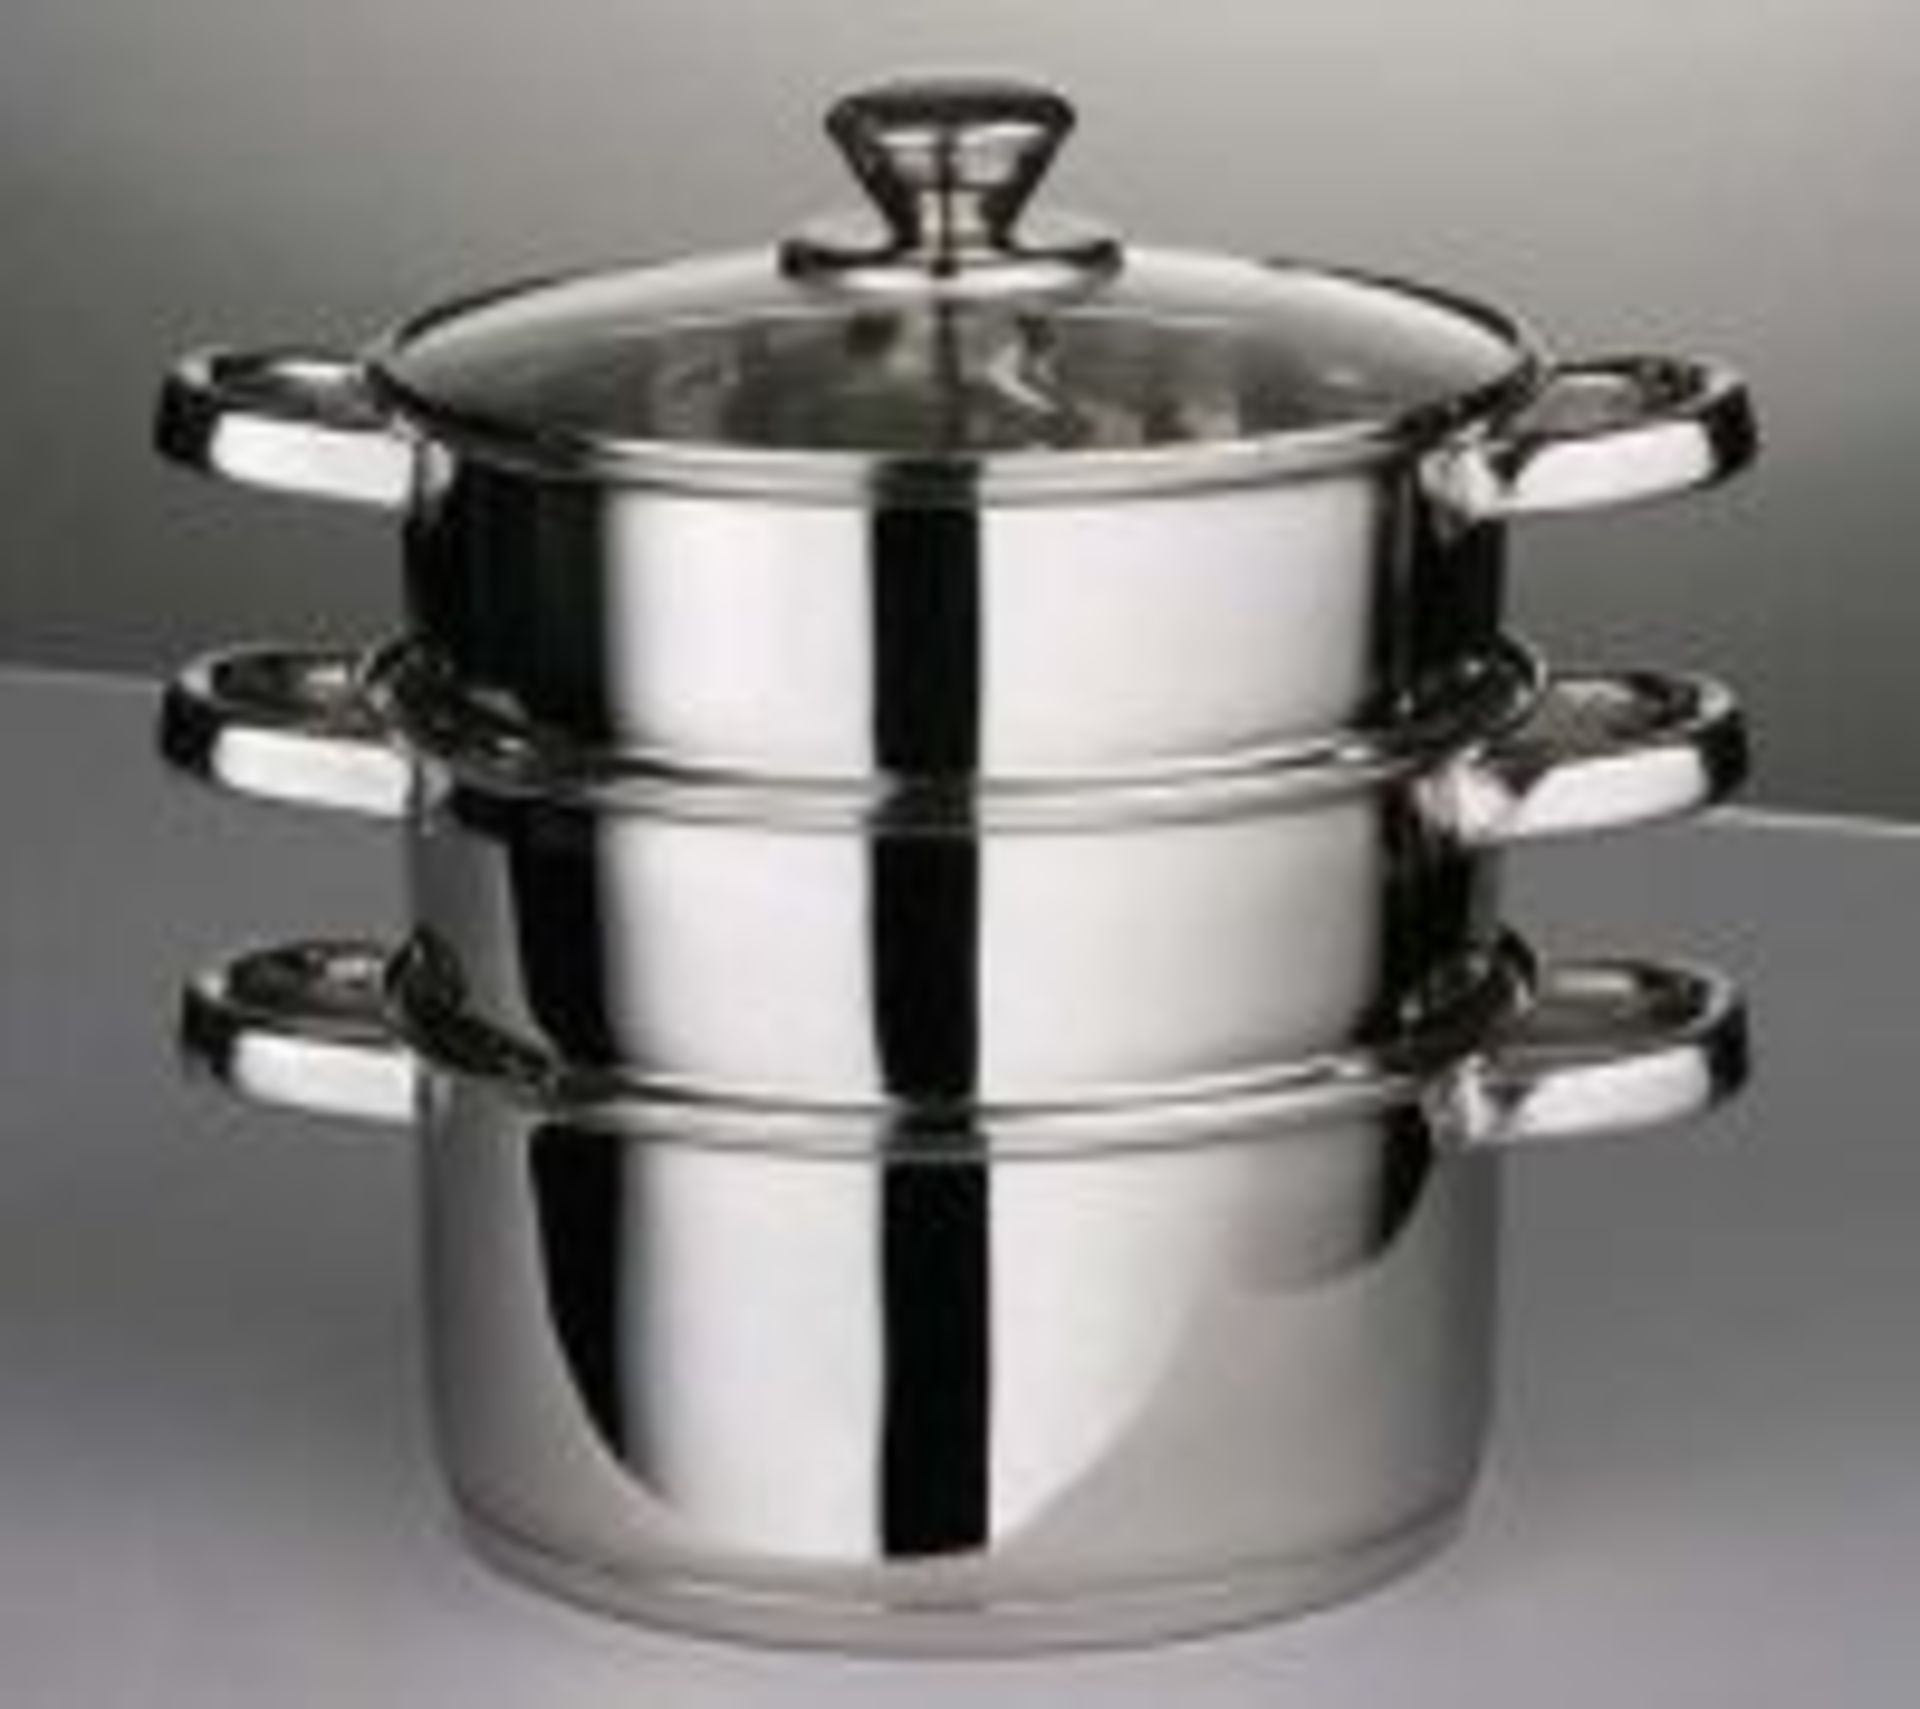 V Brand New Three Piece 22cm Stainless Steel Steamer Set Consists Of 2 X22cm Steamers & 22cm